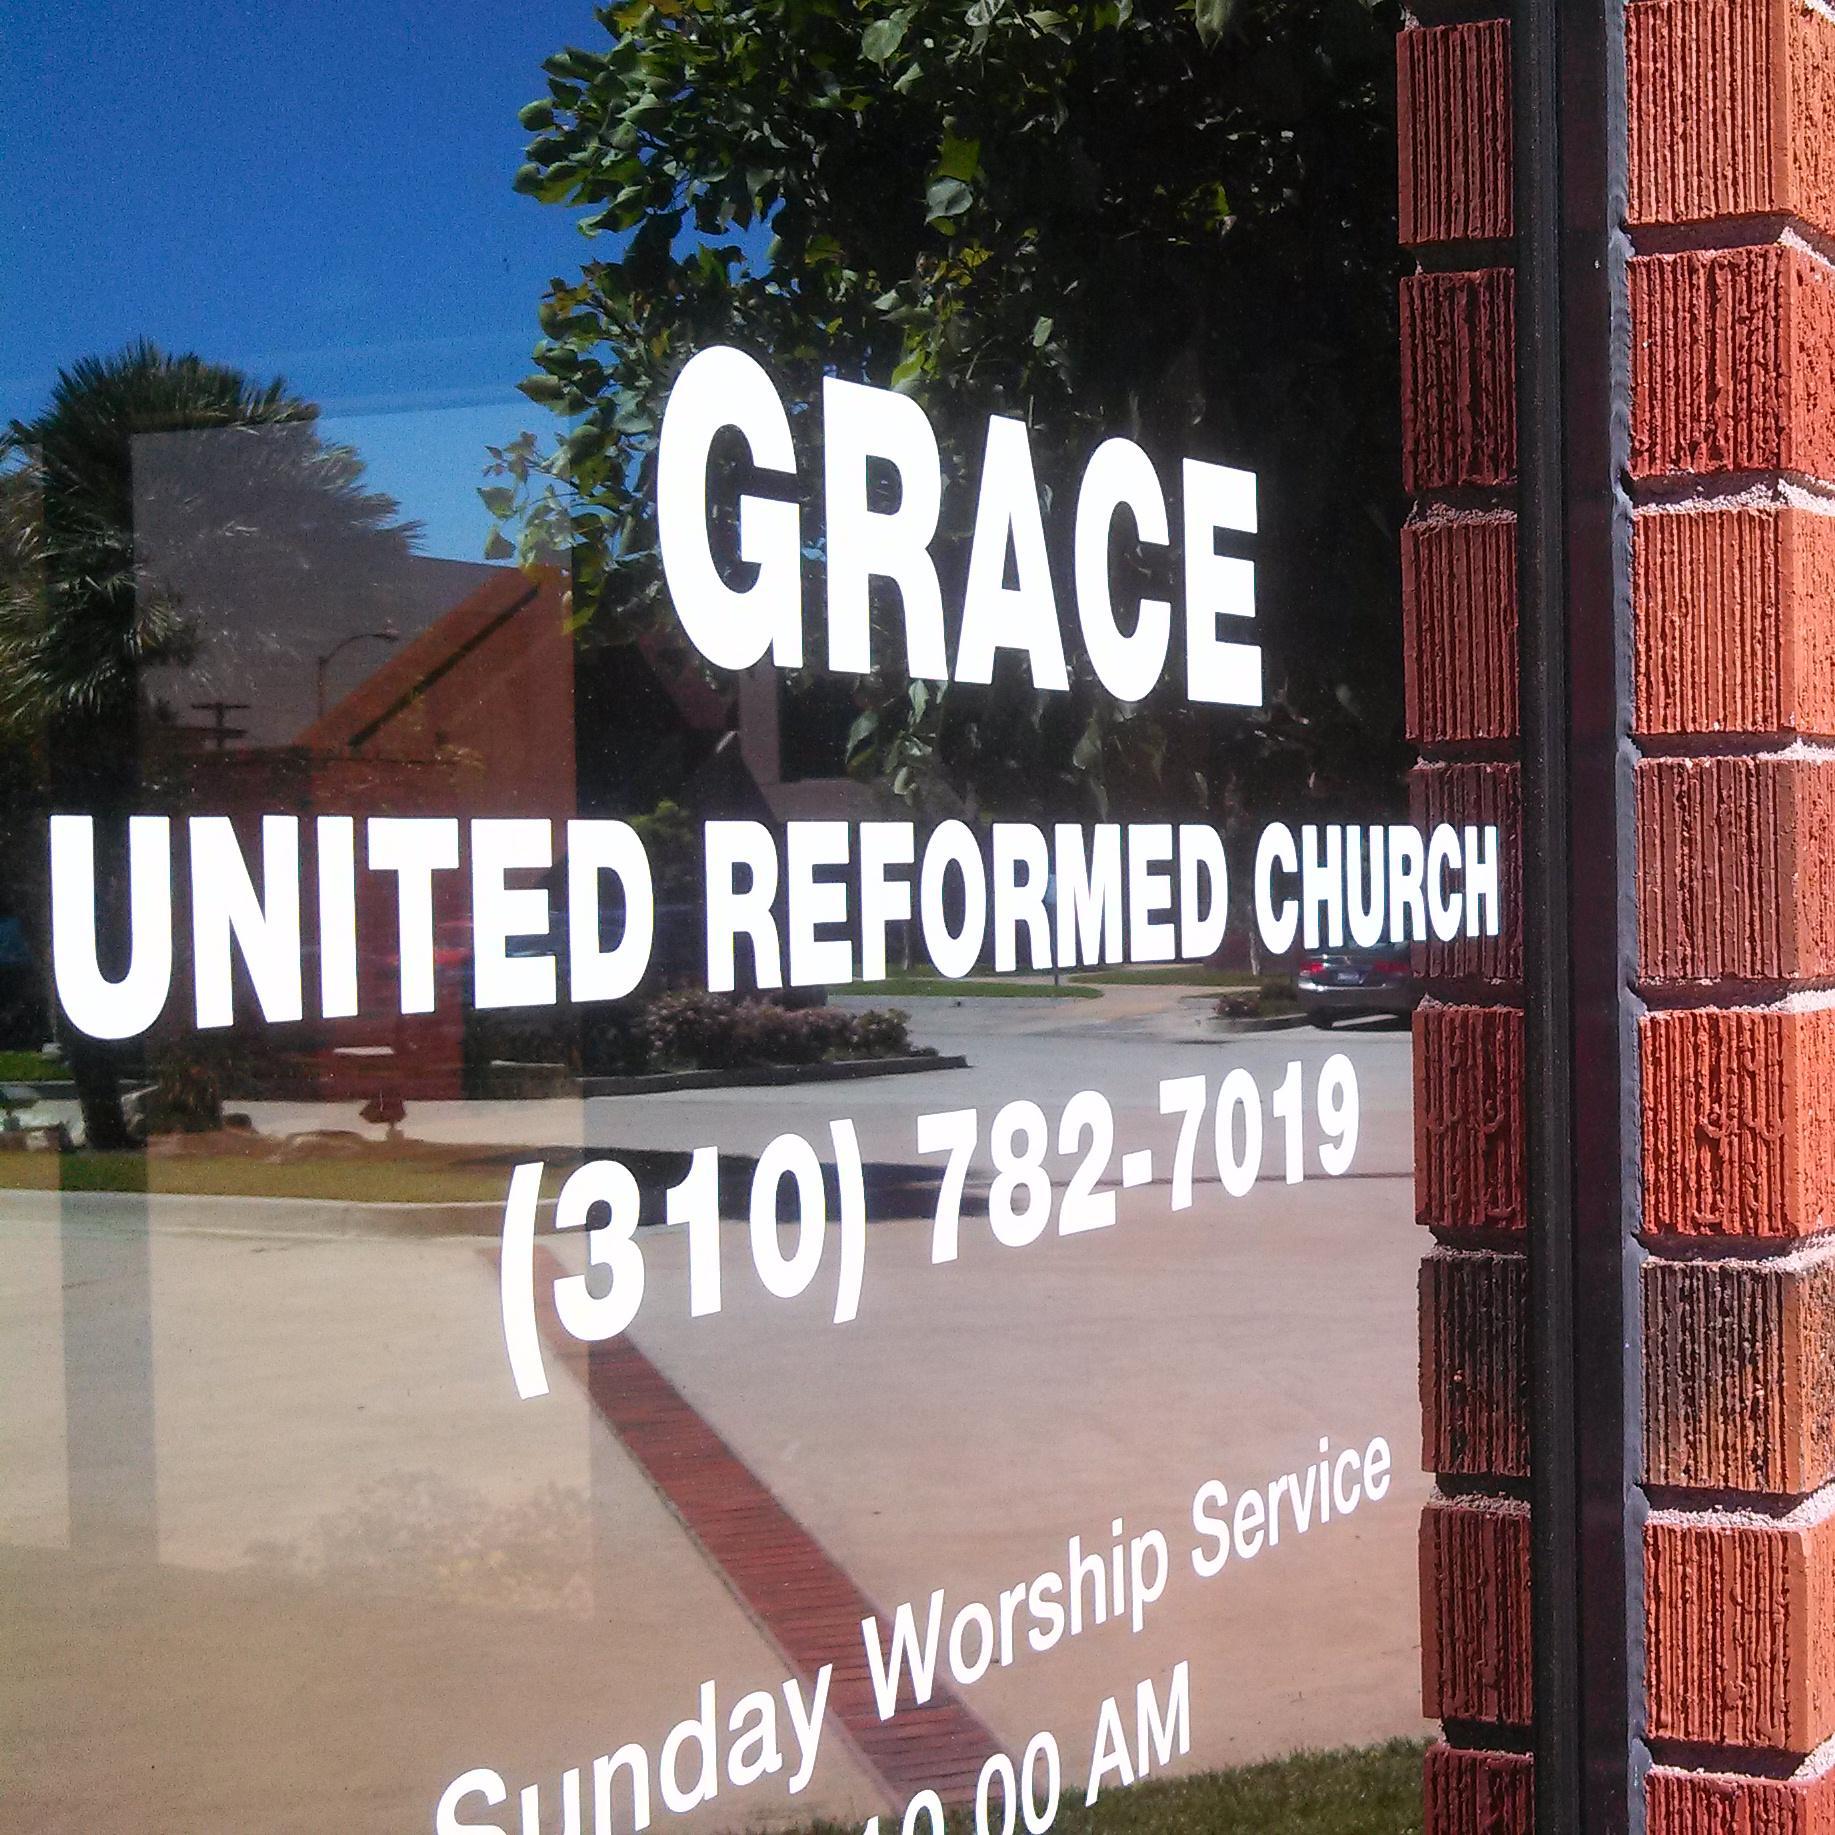 We are a small Reformed congregation located in the heart of the Los Angeles South Bay region.